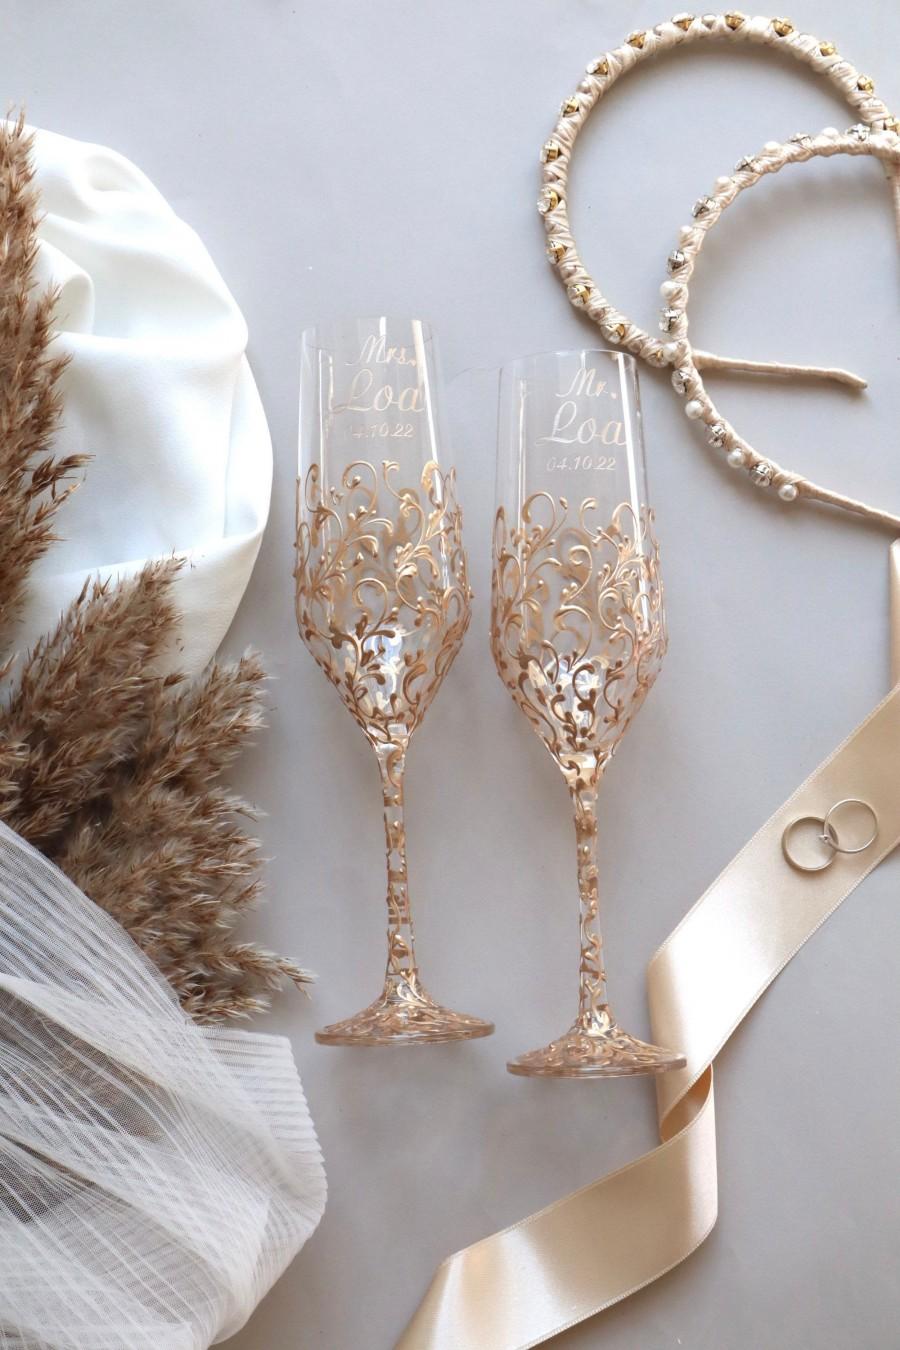 Mariage - personalized wedding glasses Toasting flutes, champagne flutes bride and groom, Personalized gift, wedding decorations, flutes set of2